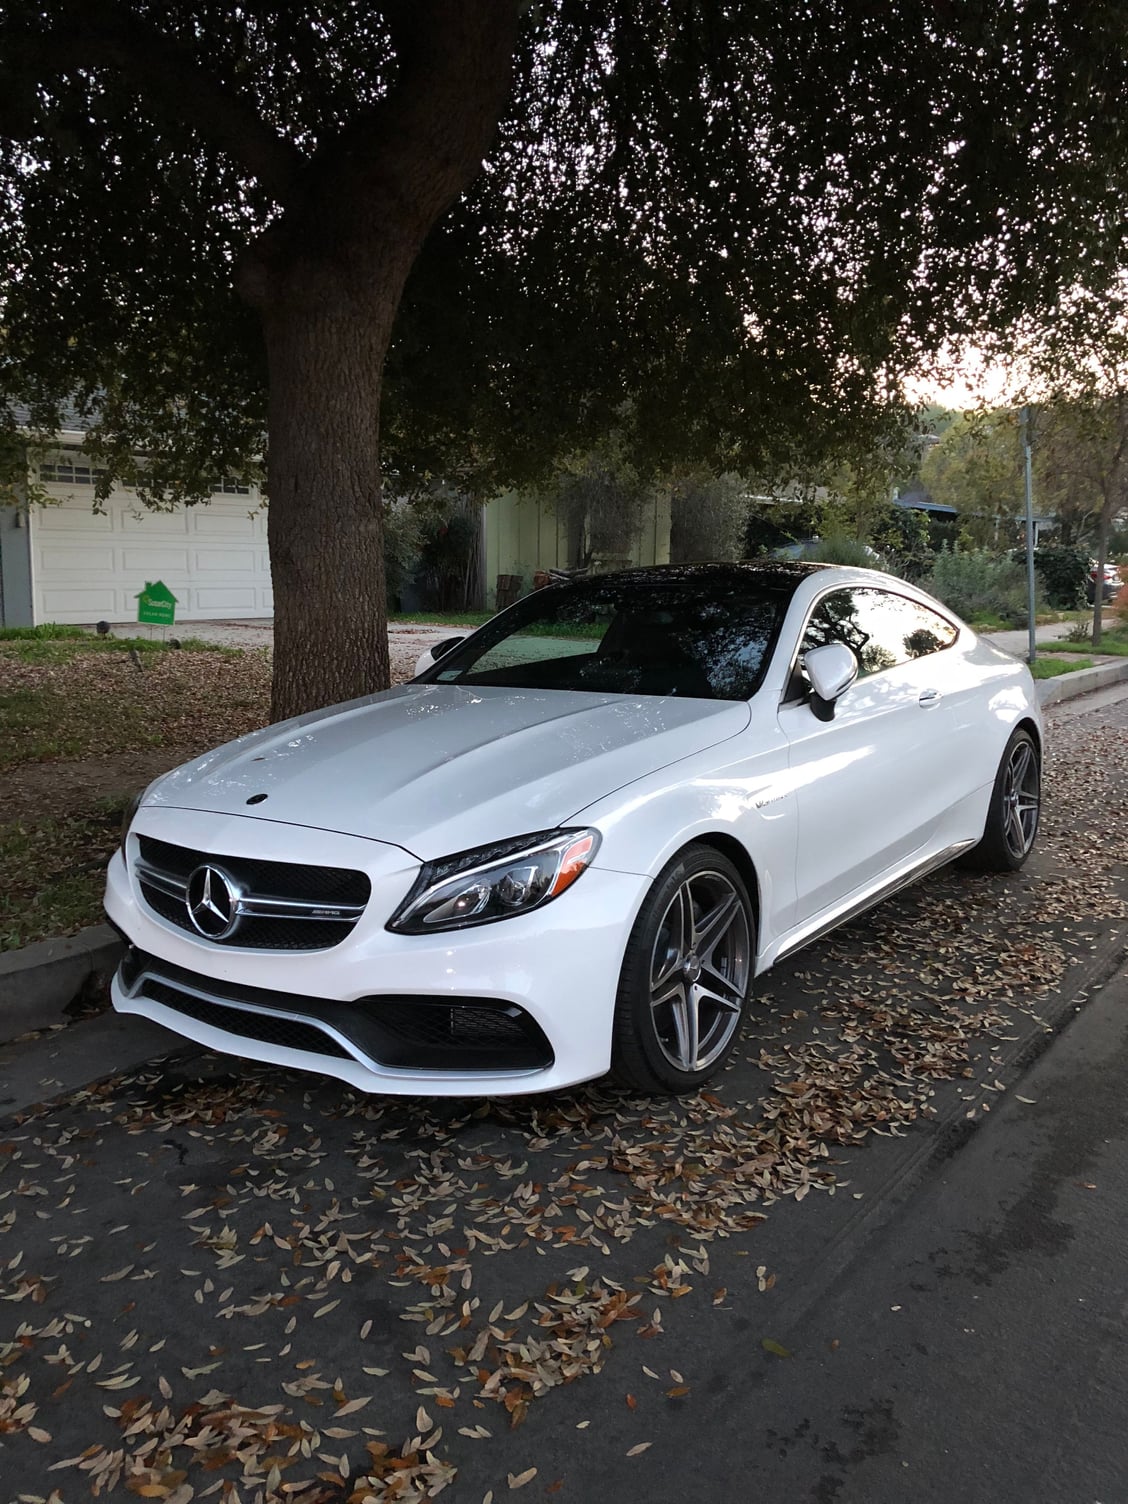 2018 Mercedes-Benz C63 AMG - FS: 2018 C63 Coupe - Used - VIN WDDWJ8GB1JF646181 - 8,030 Miles - 8 cyl - 2WD - Automatic - Coupe - White - Glendale, CA 91208, United States